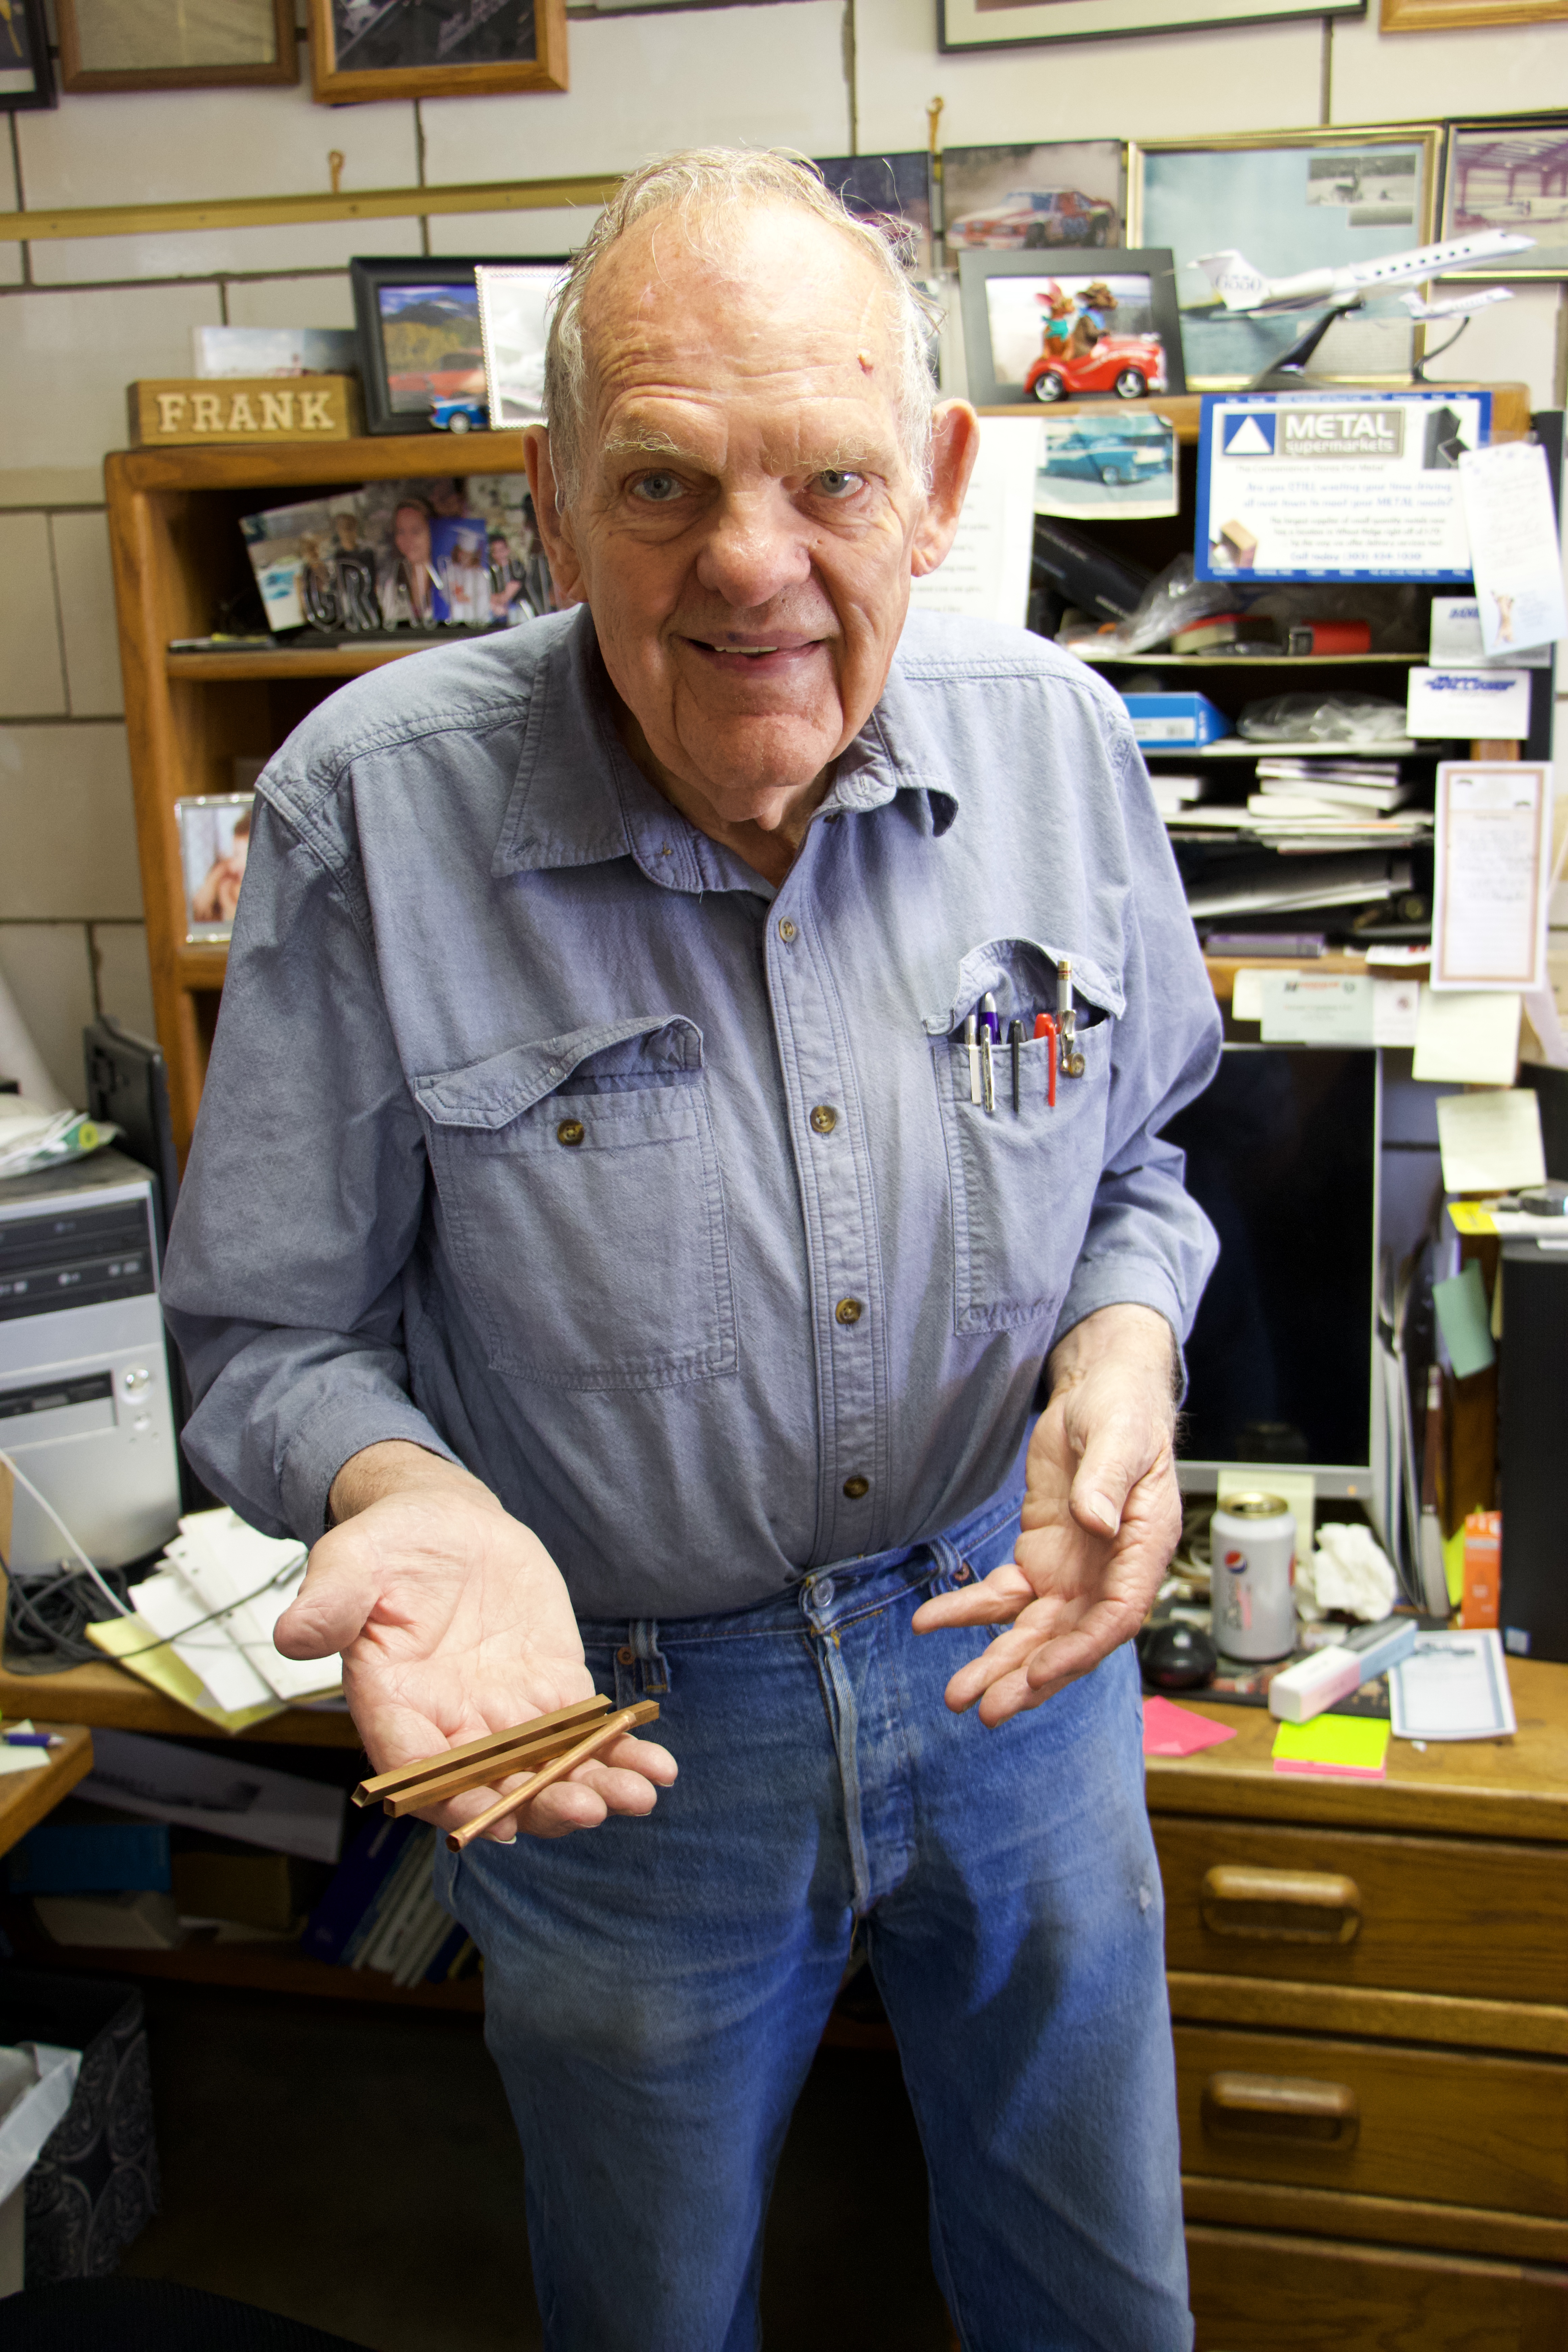 Photo of an older man, standing in front of a desk and shelves. The shelves are full of photos and mementos, and the desk has a computer on it. The man, dressed in blue jeans and a blue denim button-up shirt, with several pens and pencils resting in the breast pocket. He is smiling and holding out small three copper tubes his right hand. The tubes are about a quarter-inch in diameter and about 4 inches long.